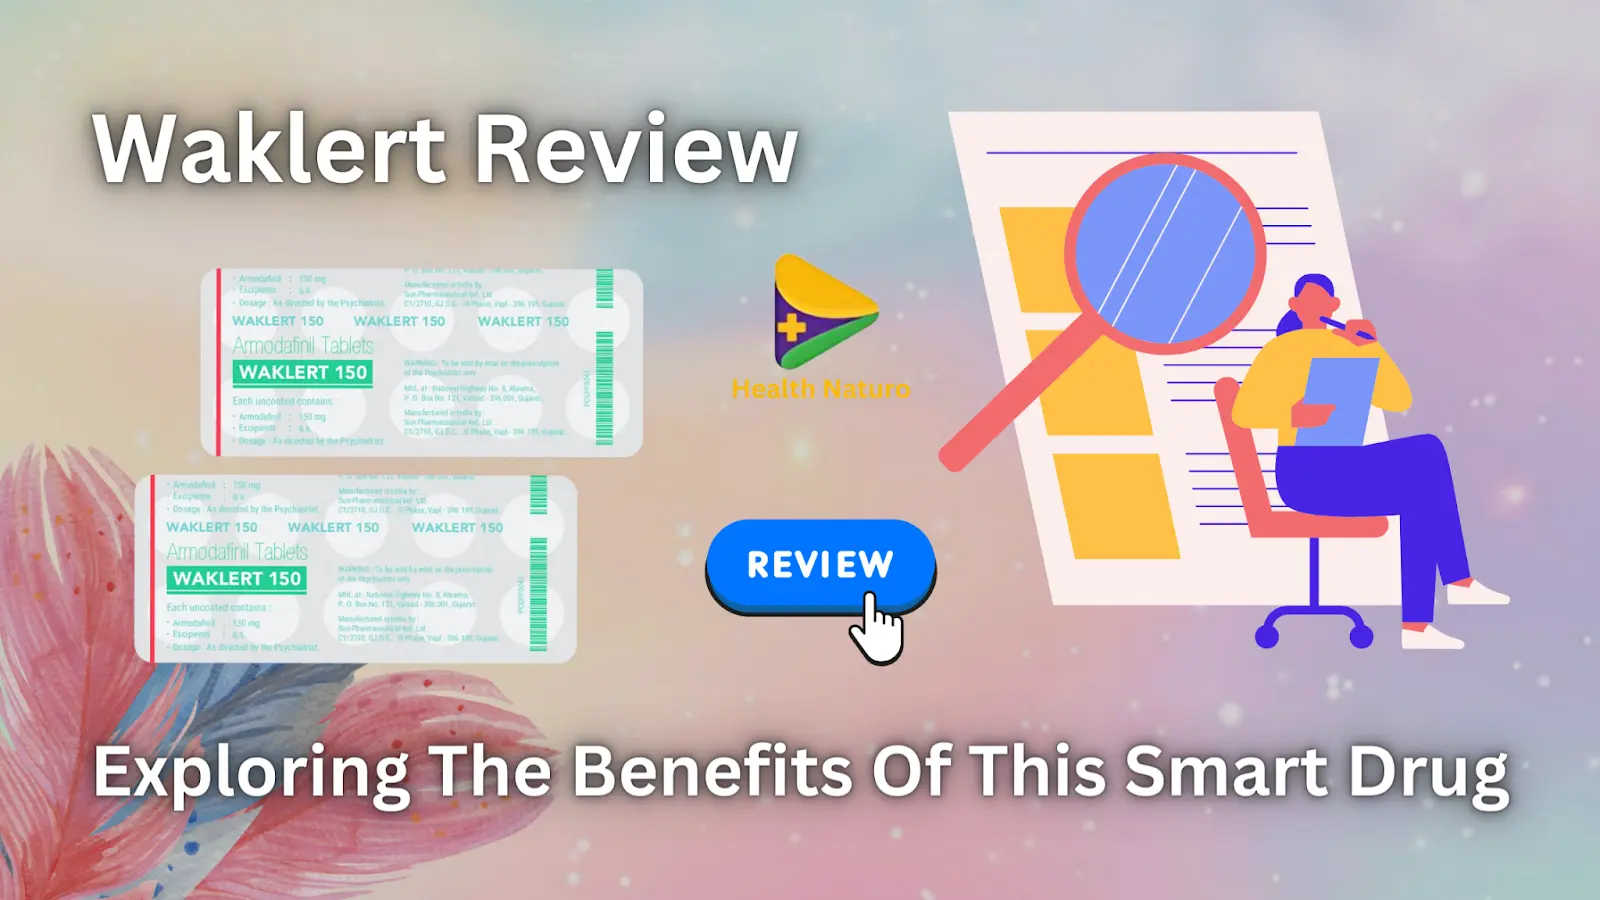 Waklert Review: Exploring The Benefits Of This Smart Drug